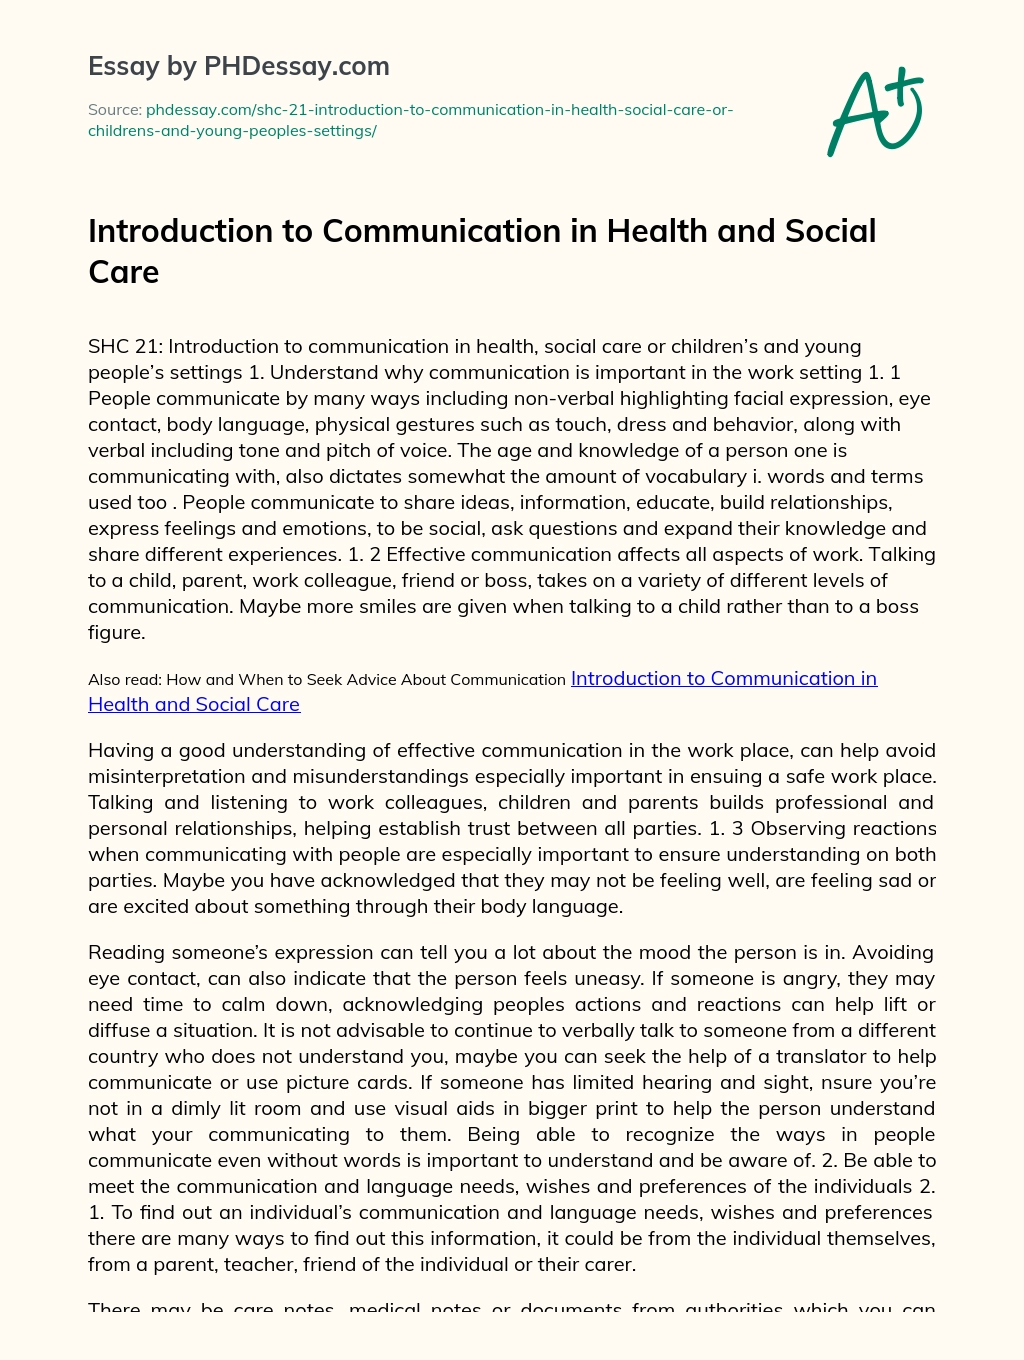 Introduction To Communication In Health, Social Care Or Children’s And Young People’s Settings essay